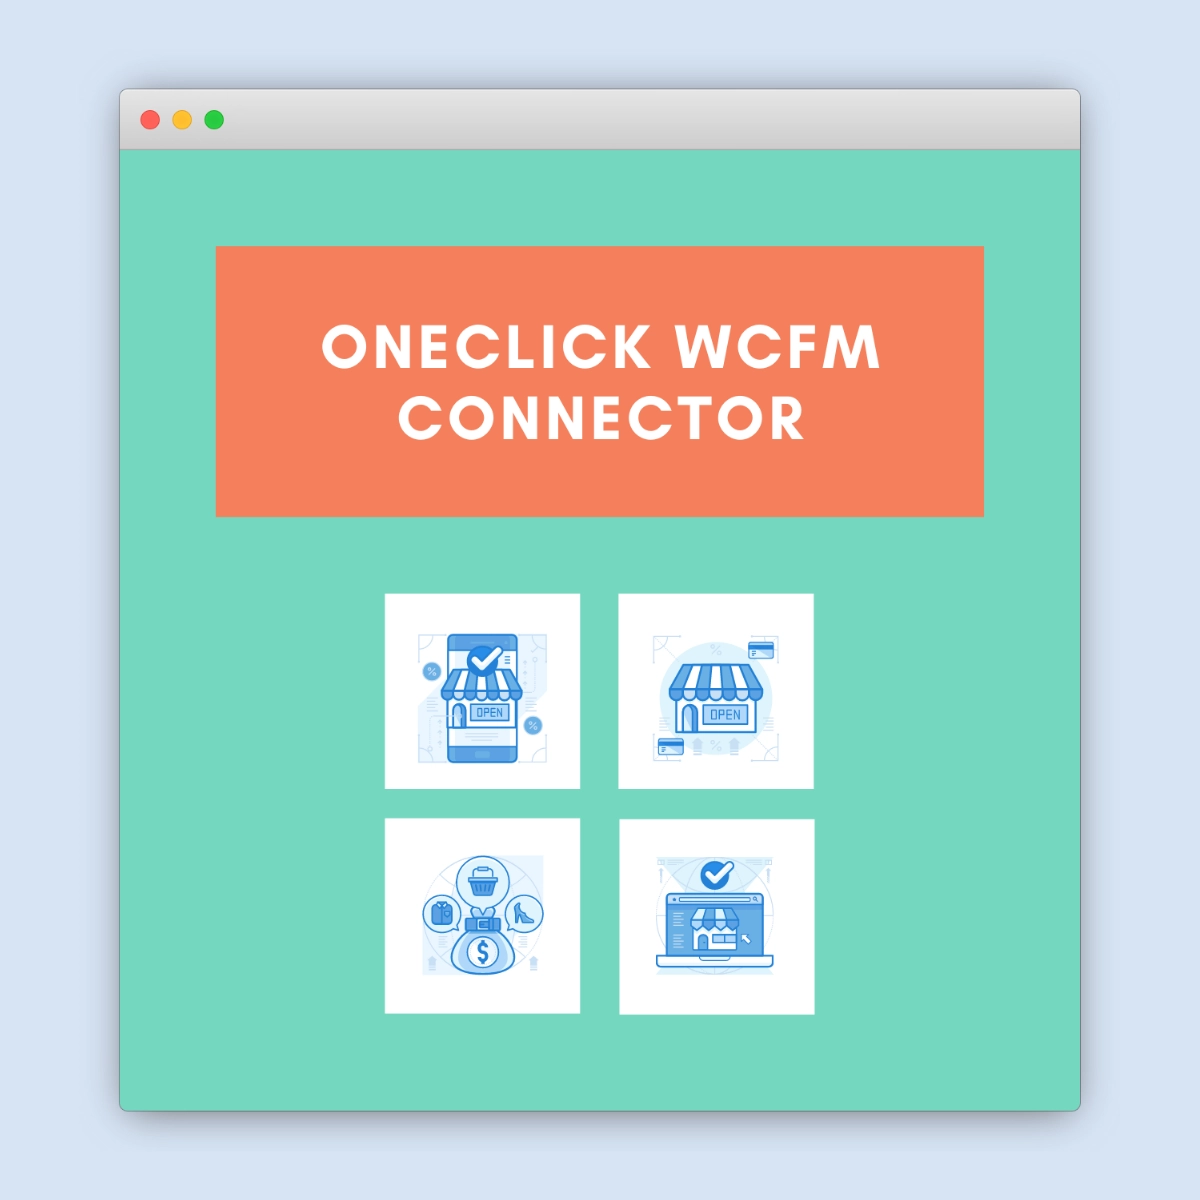 oneclick wcfm connector an add on for oneclick chat to order 1 0 0 650e88b9b7660